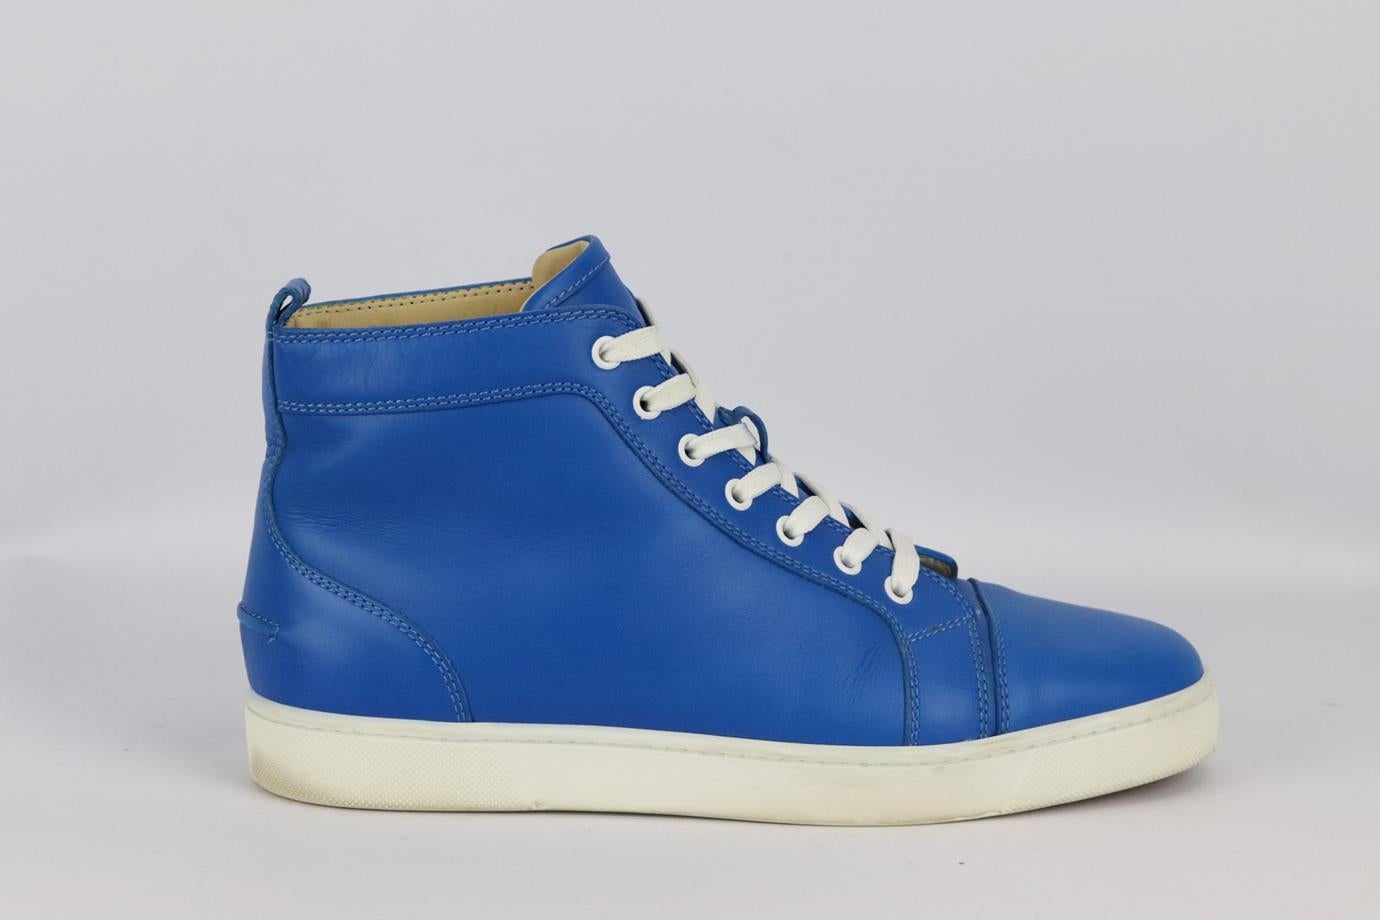 Christian Louboutin men's Louis leather high top sneakers. Blue. Lace up fastening at front. Comes with dustbag. Size: EU 42 (UK 8, US 9). Insole: 10.75 in. Heel: 1 in. Very good condition - Wear to soles. Some marks to upper material; see pictures.
